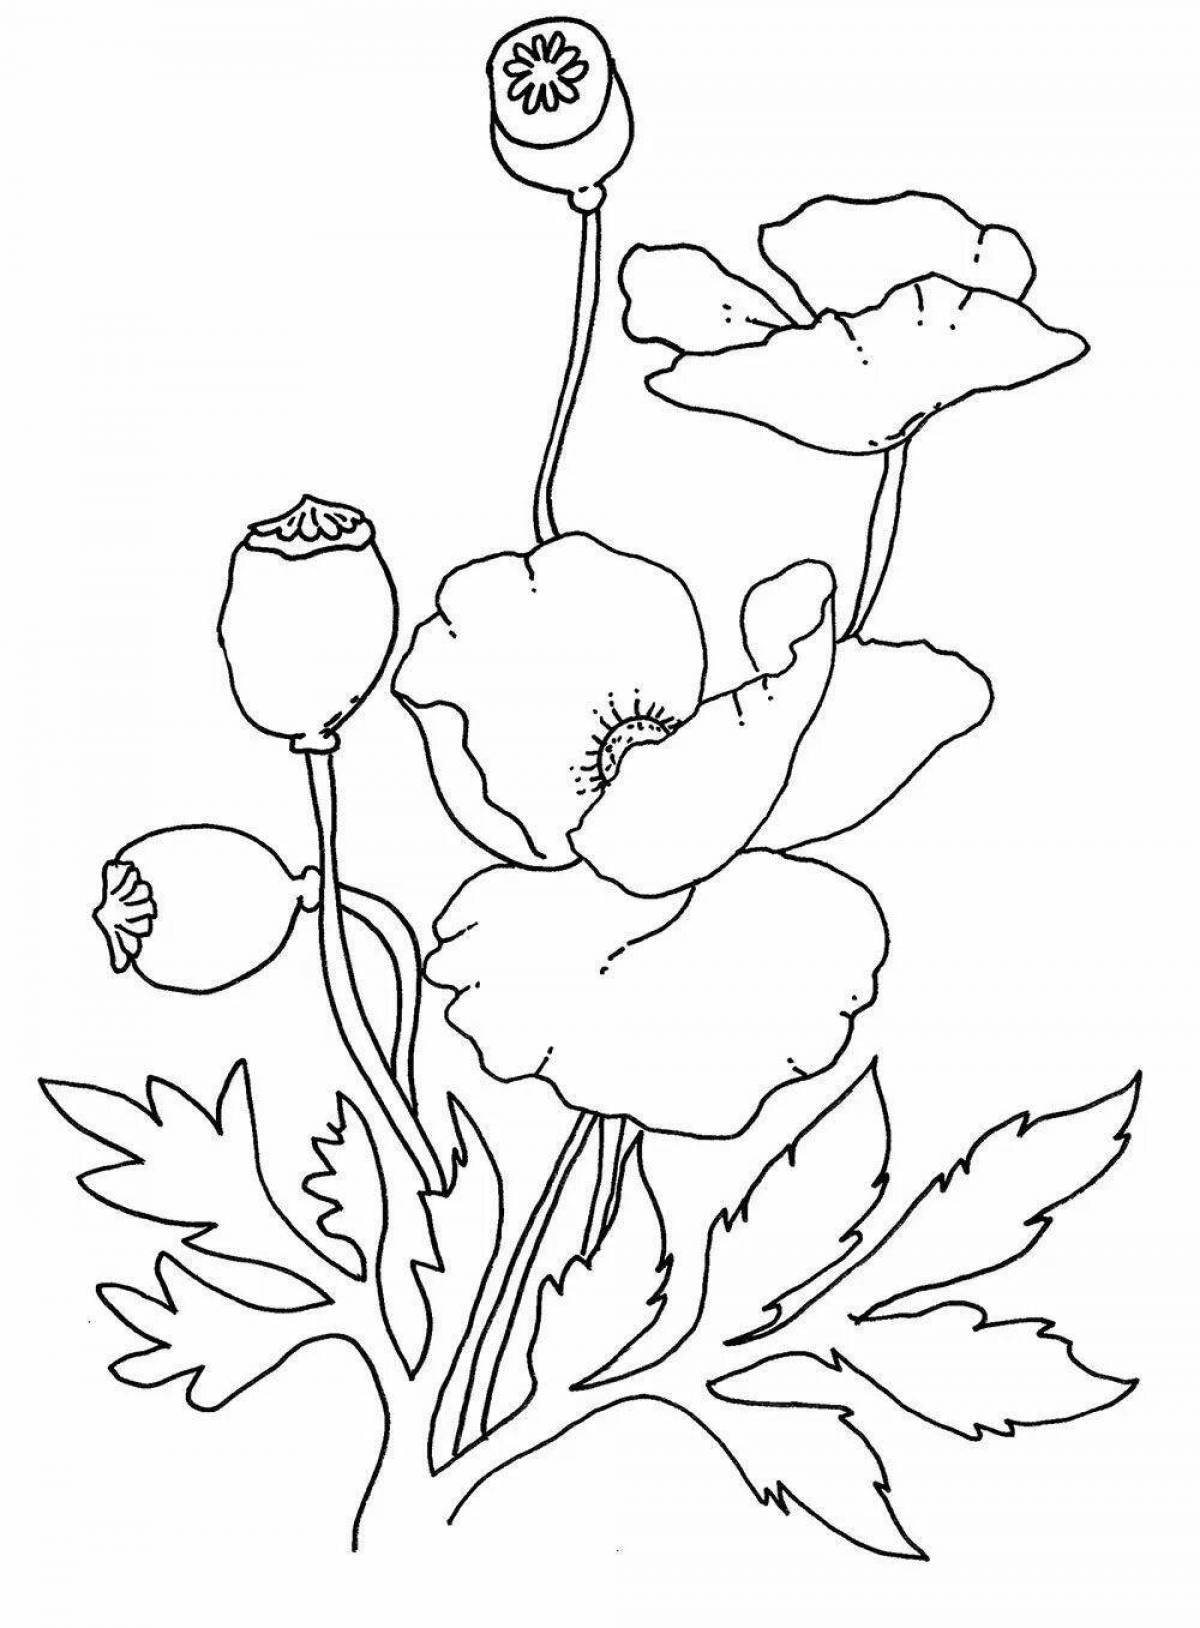 Fabulous poppy coloring book for kids